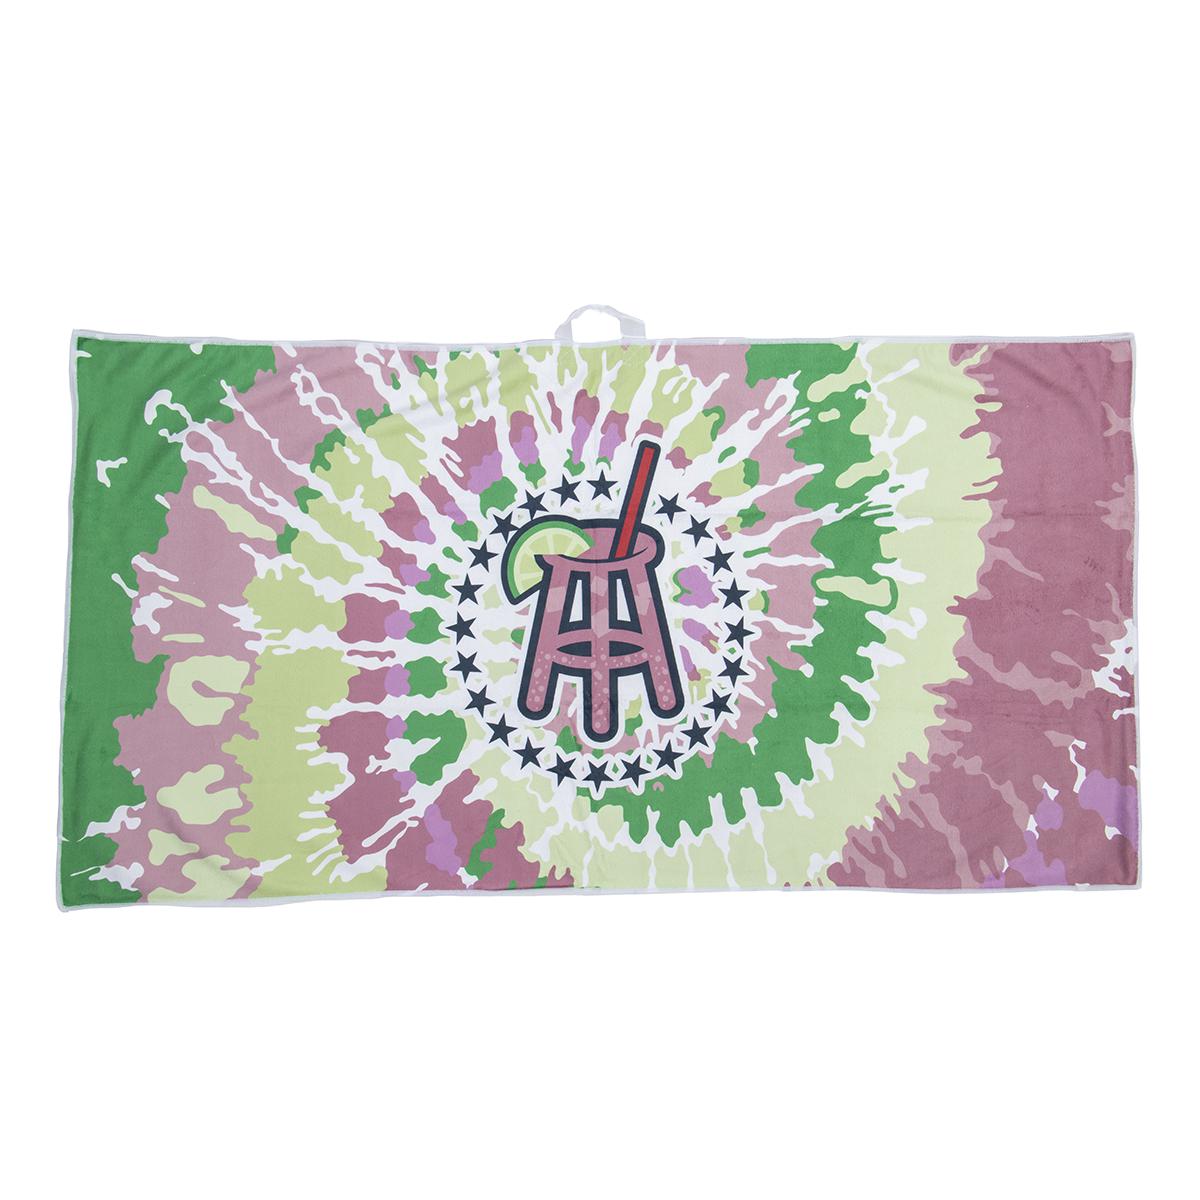 Barstool Transfusion Tie-Dye Golf Towel-Golf Accessories-Fore Play-One Size-Tie Dye-Barstool Sports